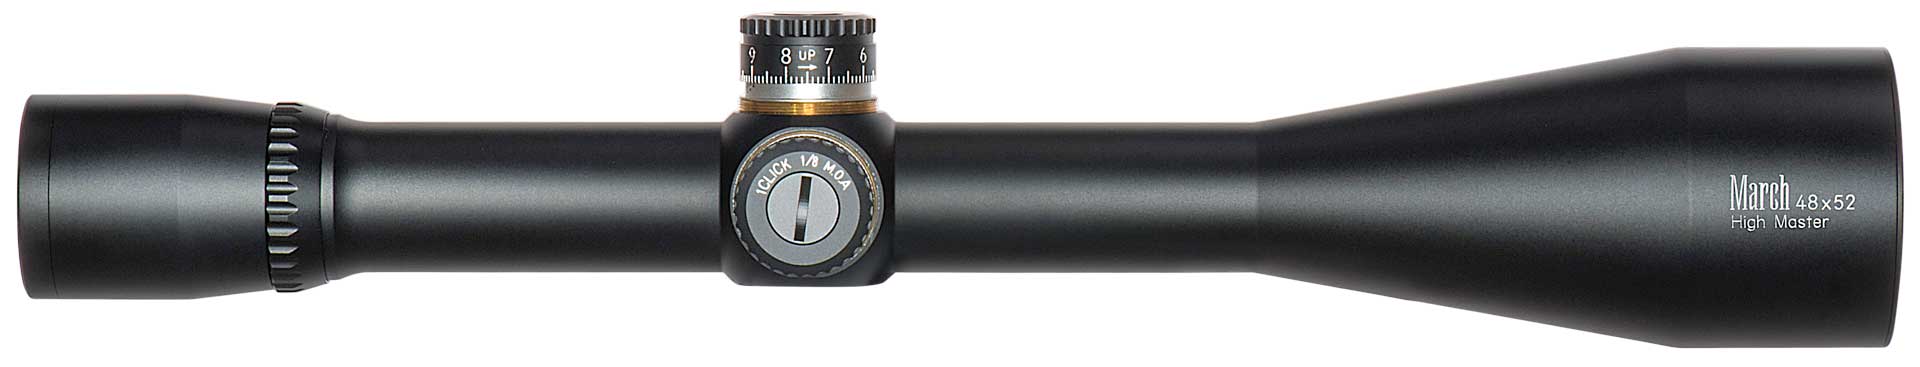 March 48×52 BR. HIGH MASTER SFP Rifle scope-1